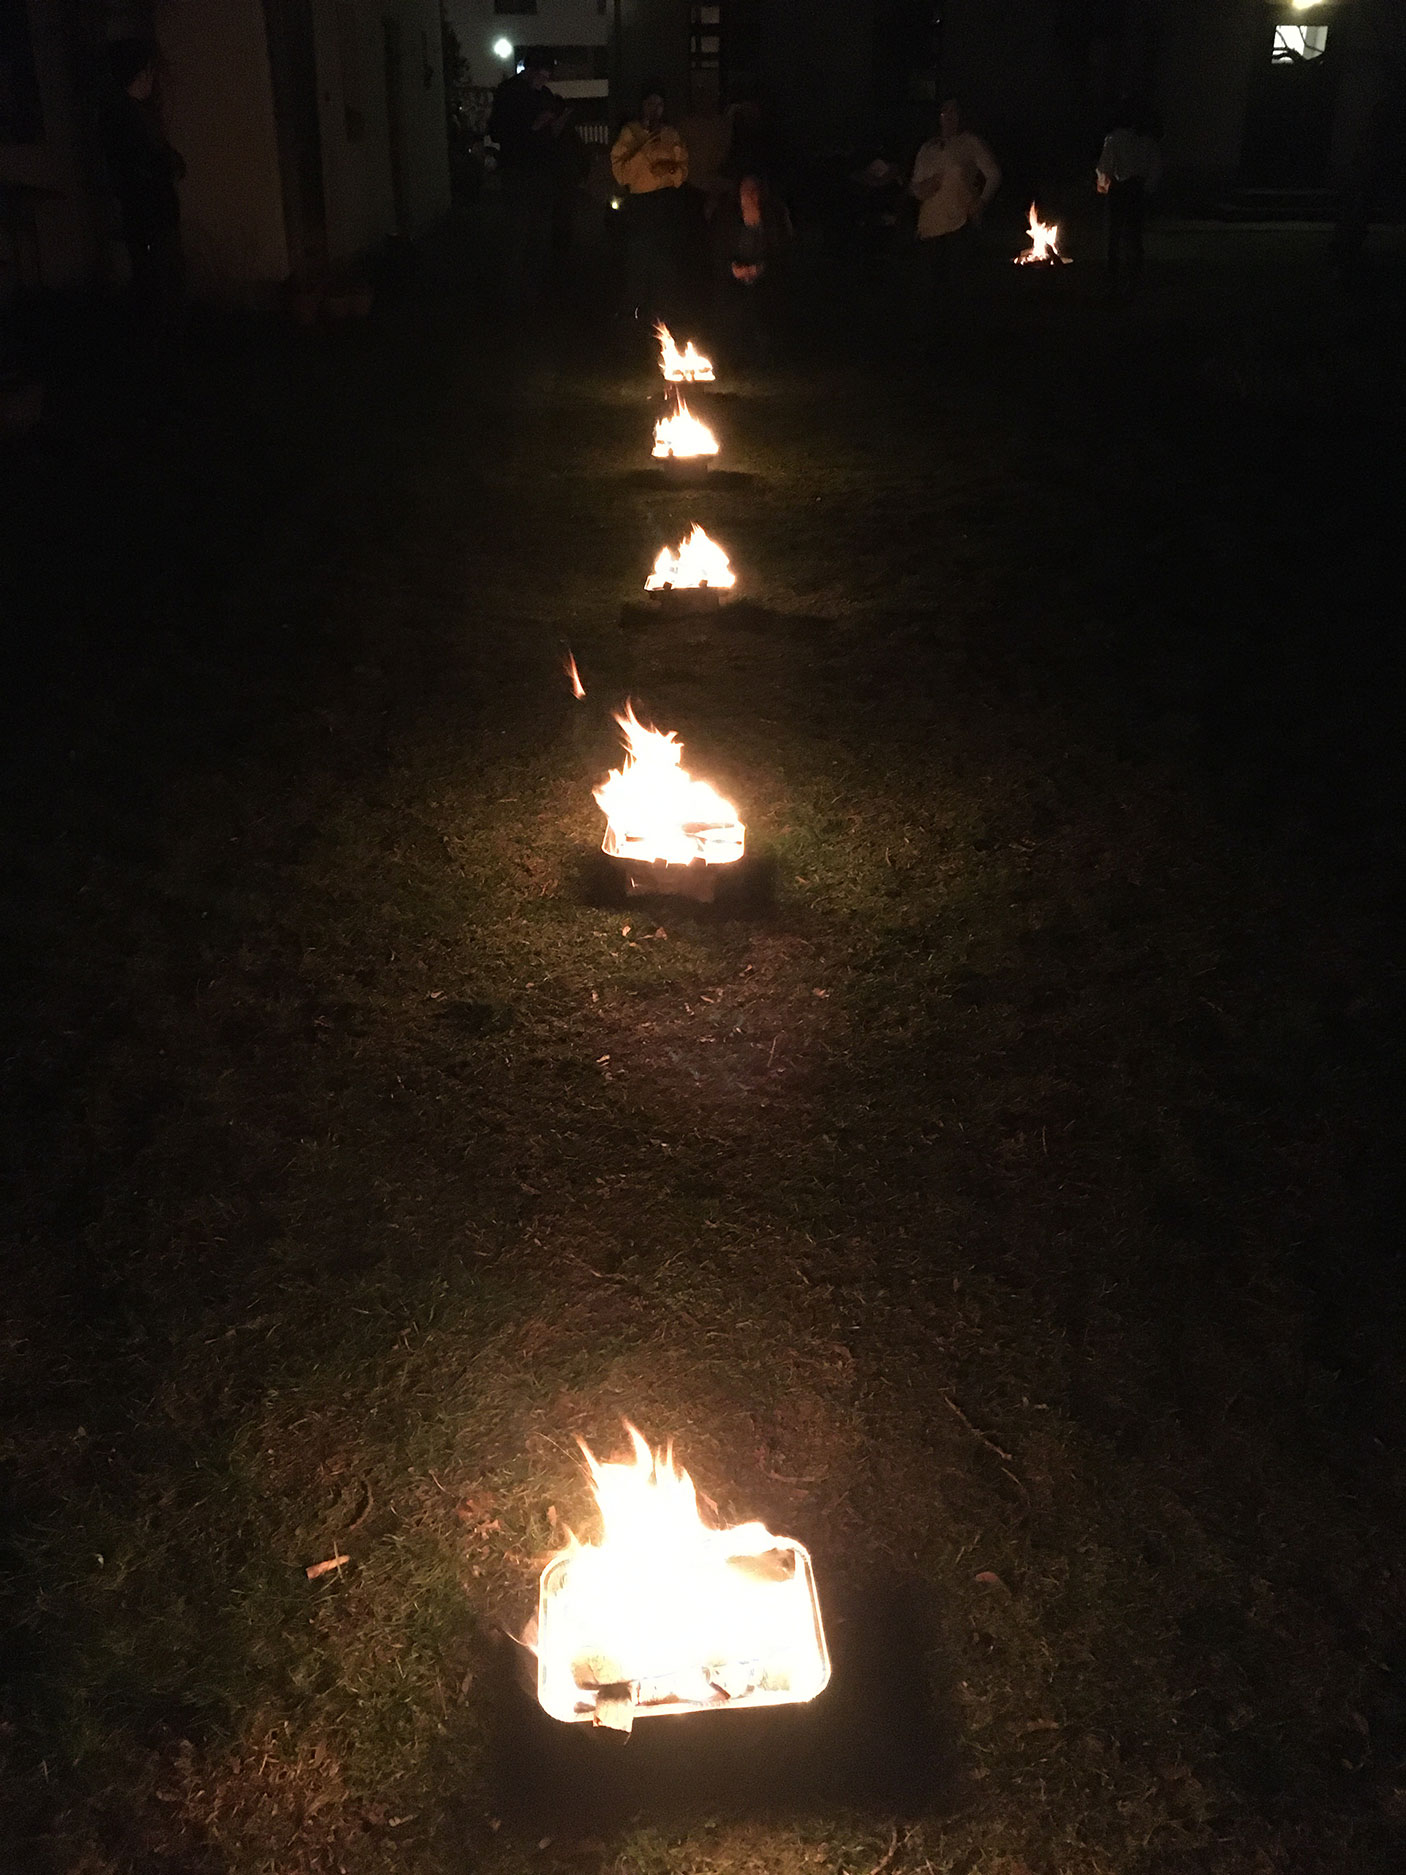 The series of fires set in the church garden on Chaharshanbe Suri. People jump over the fires in symbolism of burning away the bad of the previous year, with hope and light for the upcoming year. (Photo: Ryan White)